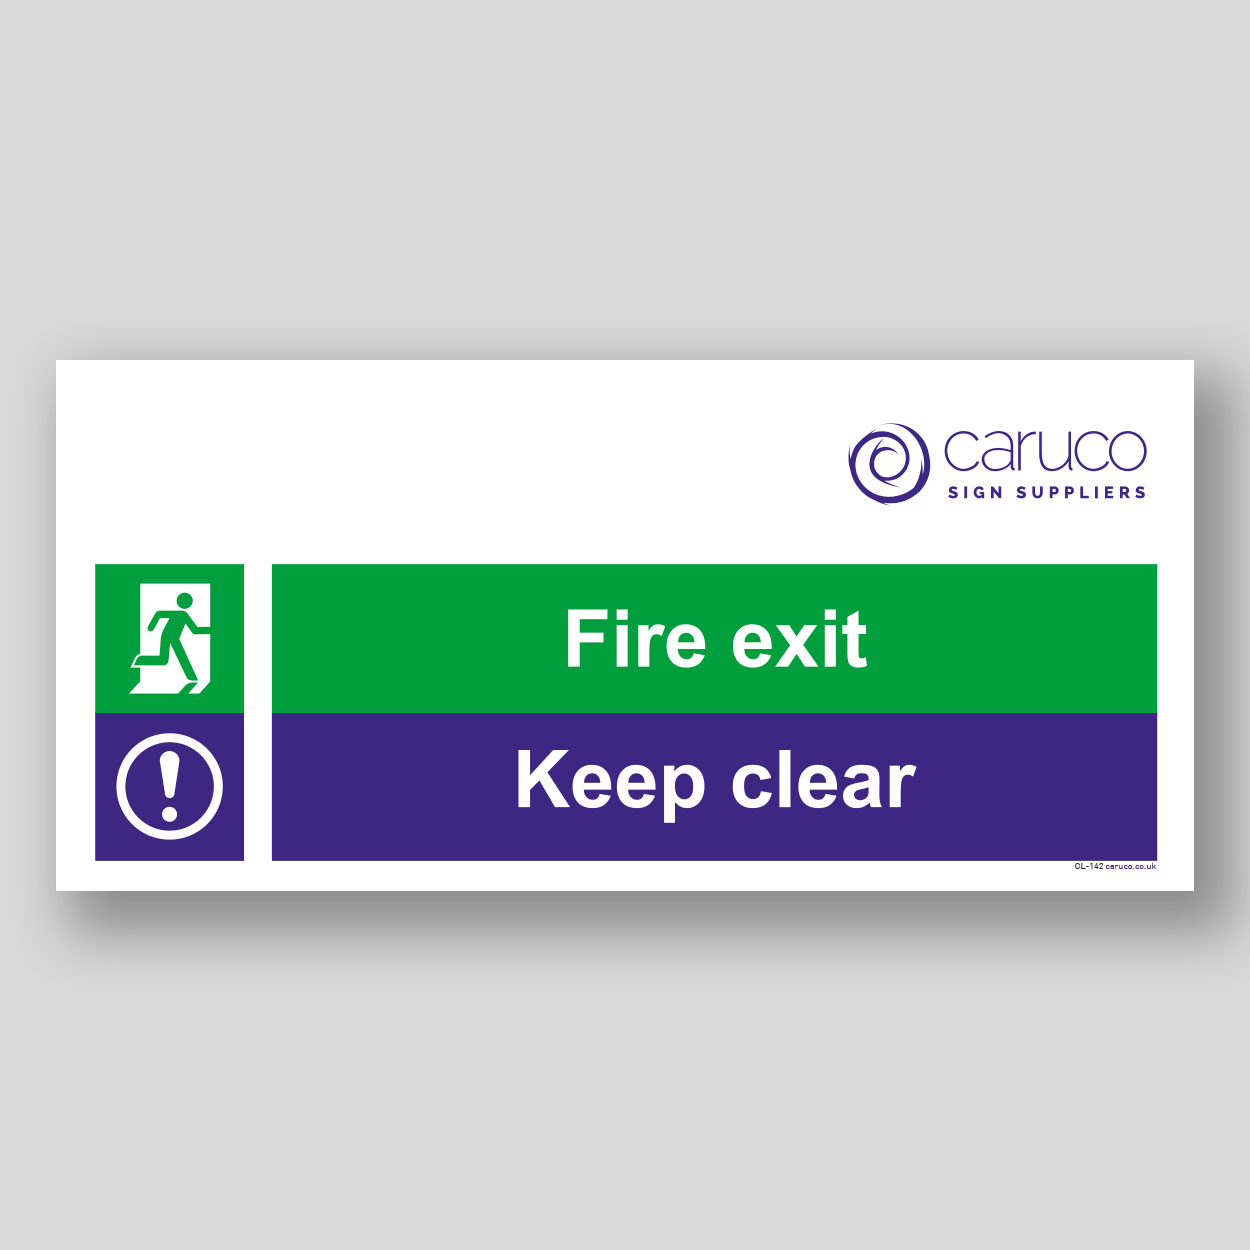 CL-142 Fire exit - keep clear